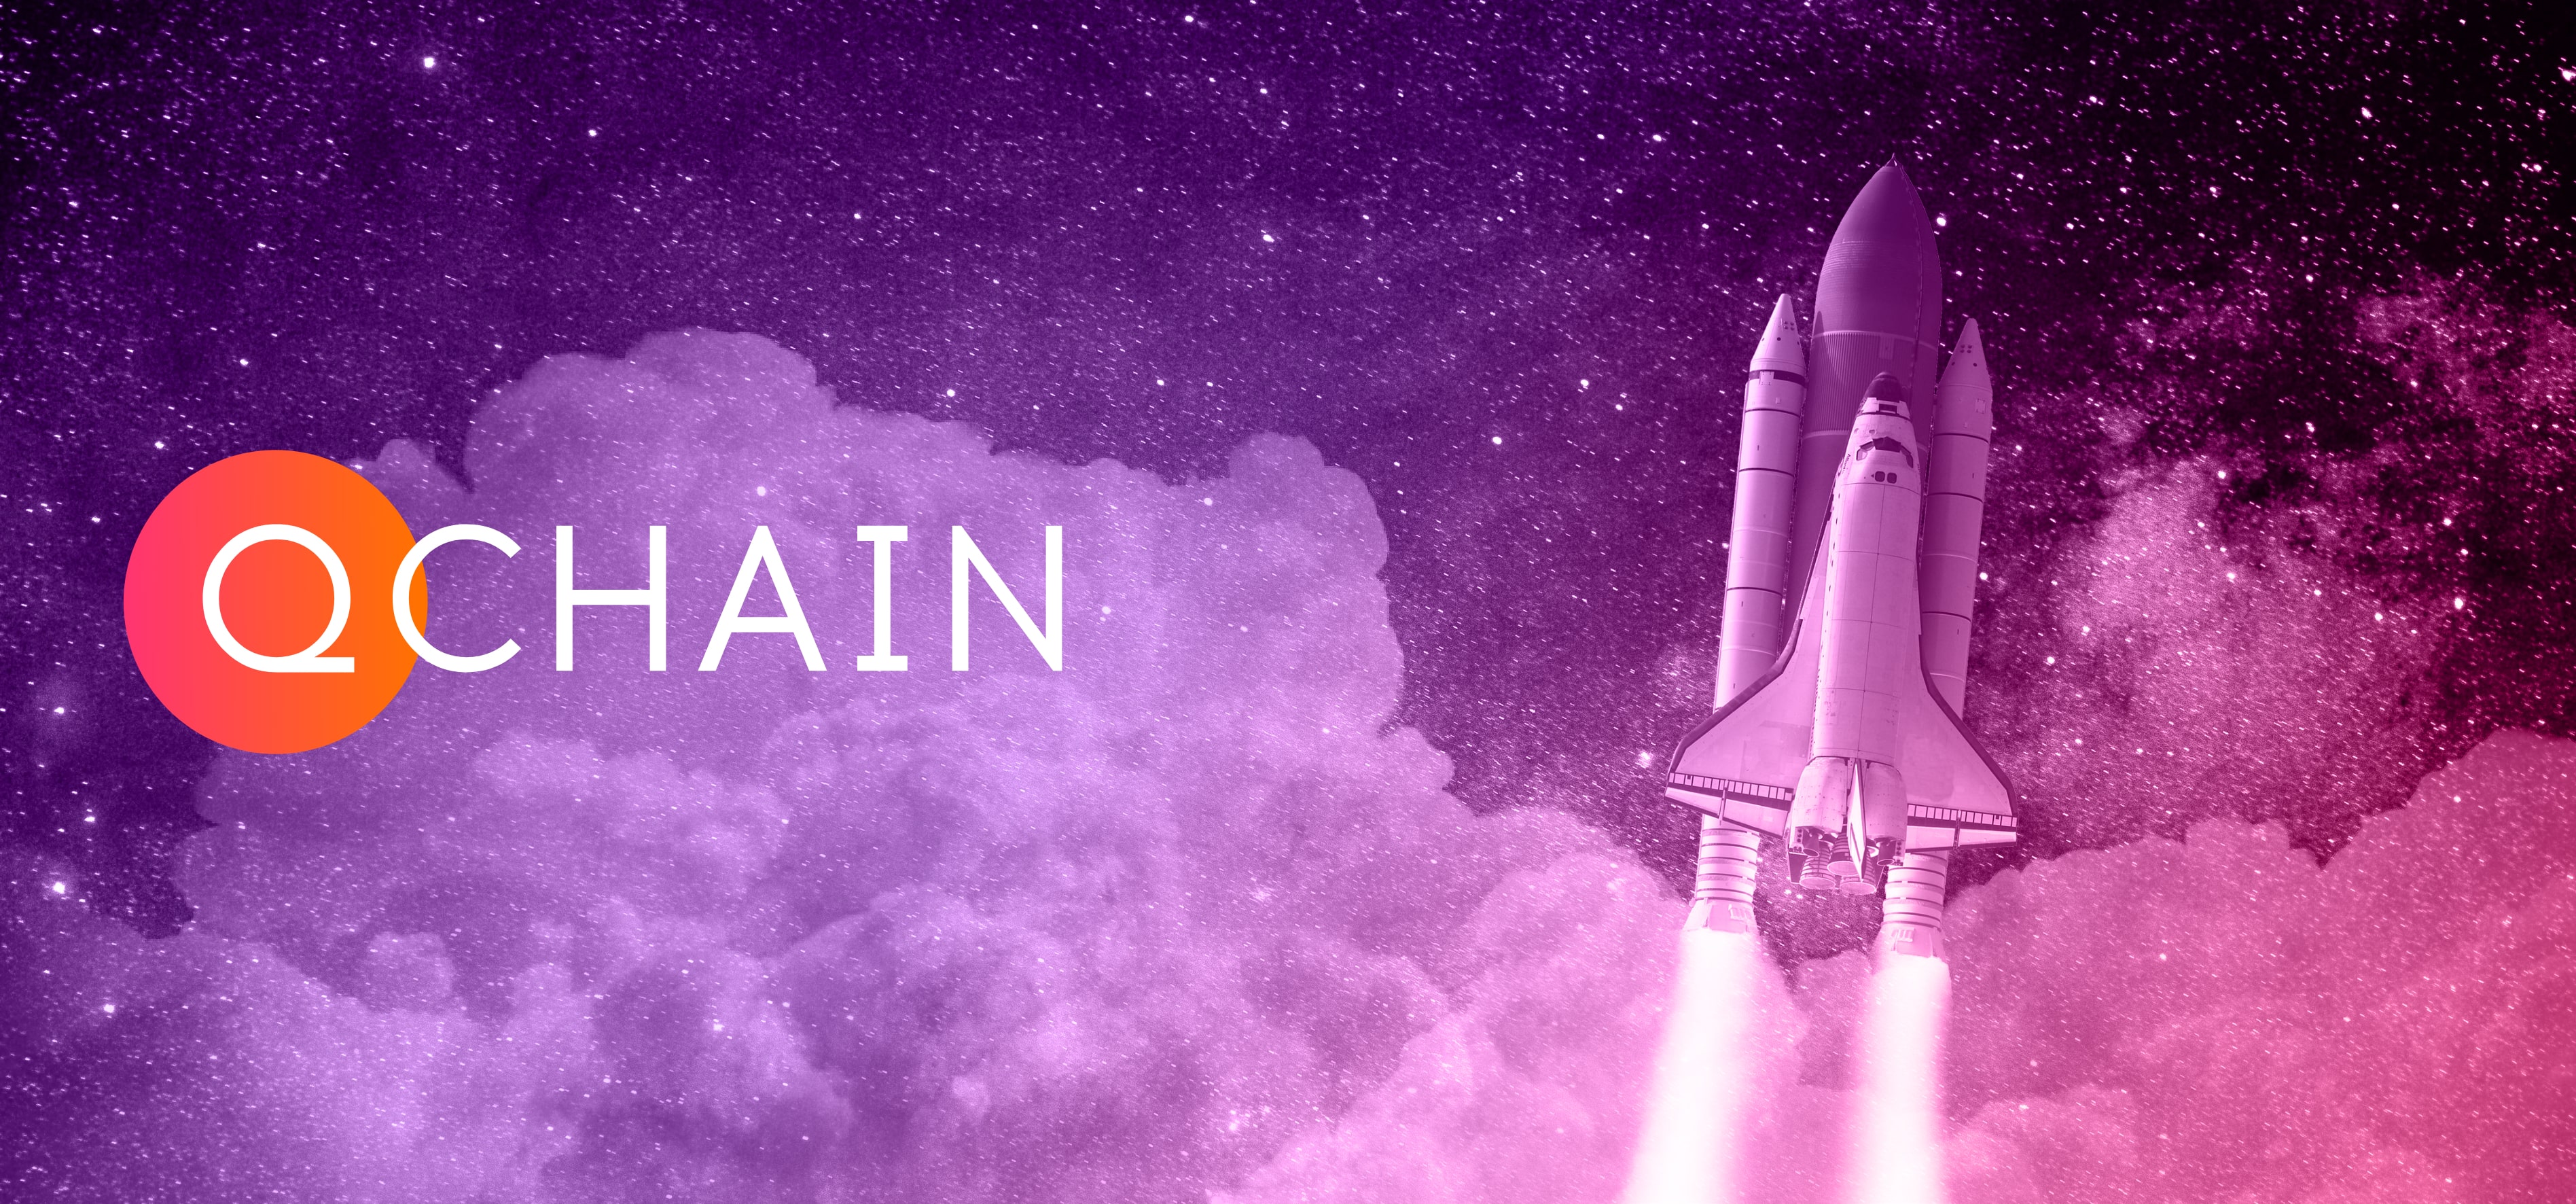 The second stage of the launch of the Mainnet on QCHAIN has started